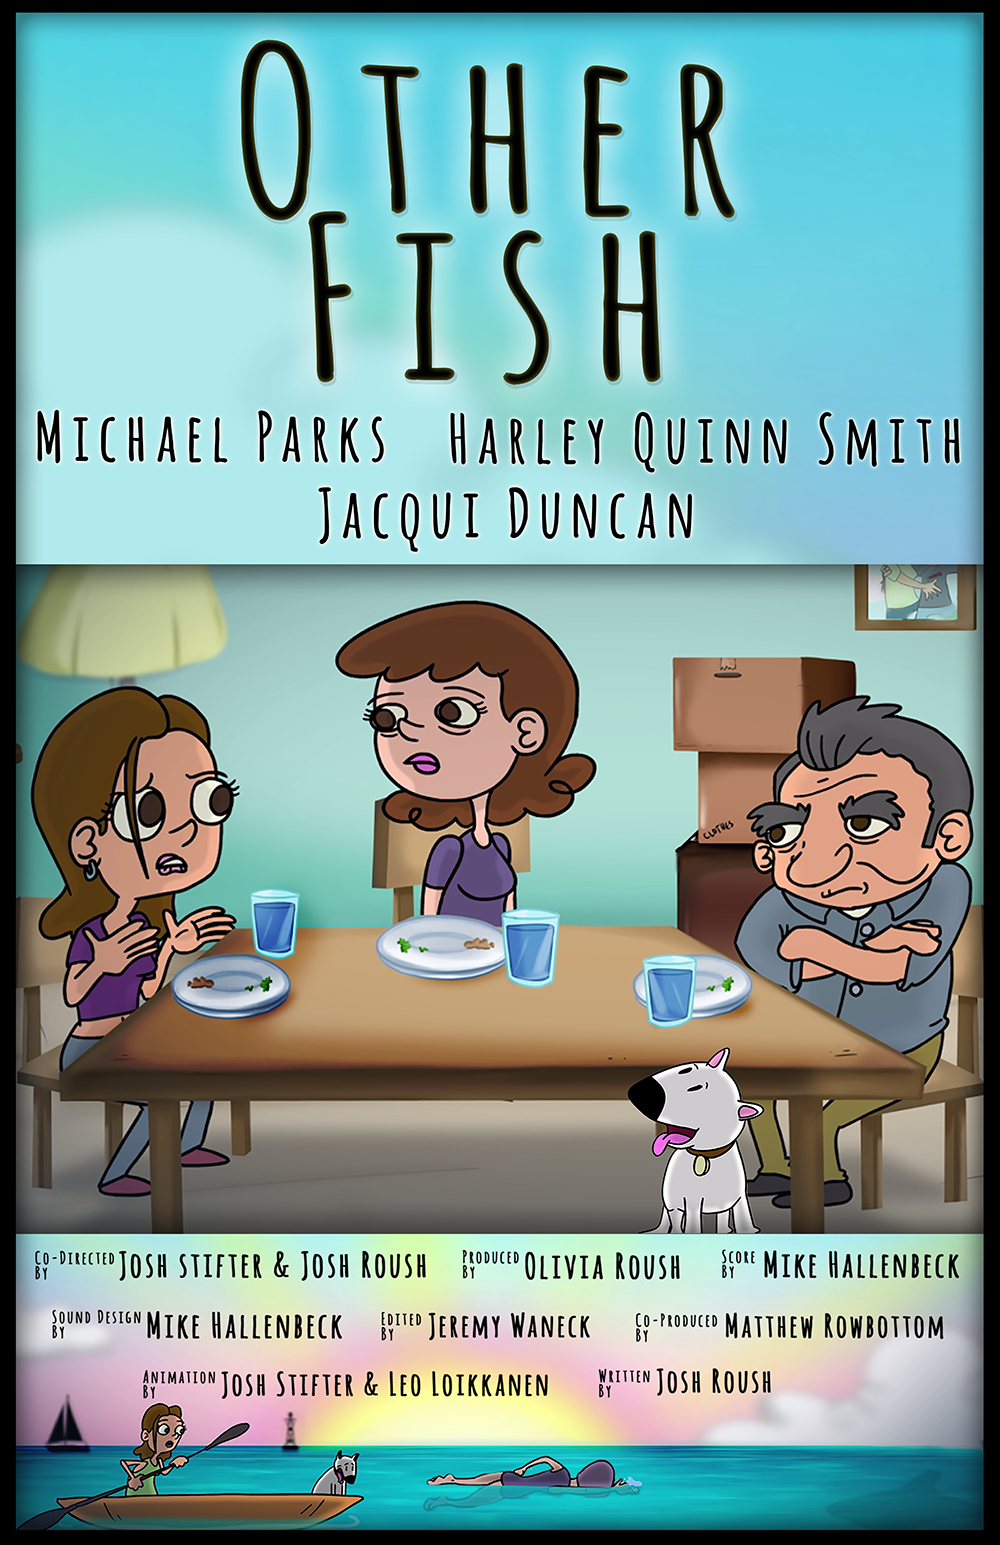 Other Fish Poster by Josh Roush and Josh Stifter starring Harley Quinn Smith, Michael Parks, and Jacqui Duncan